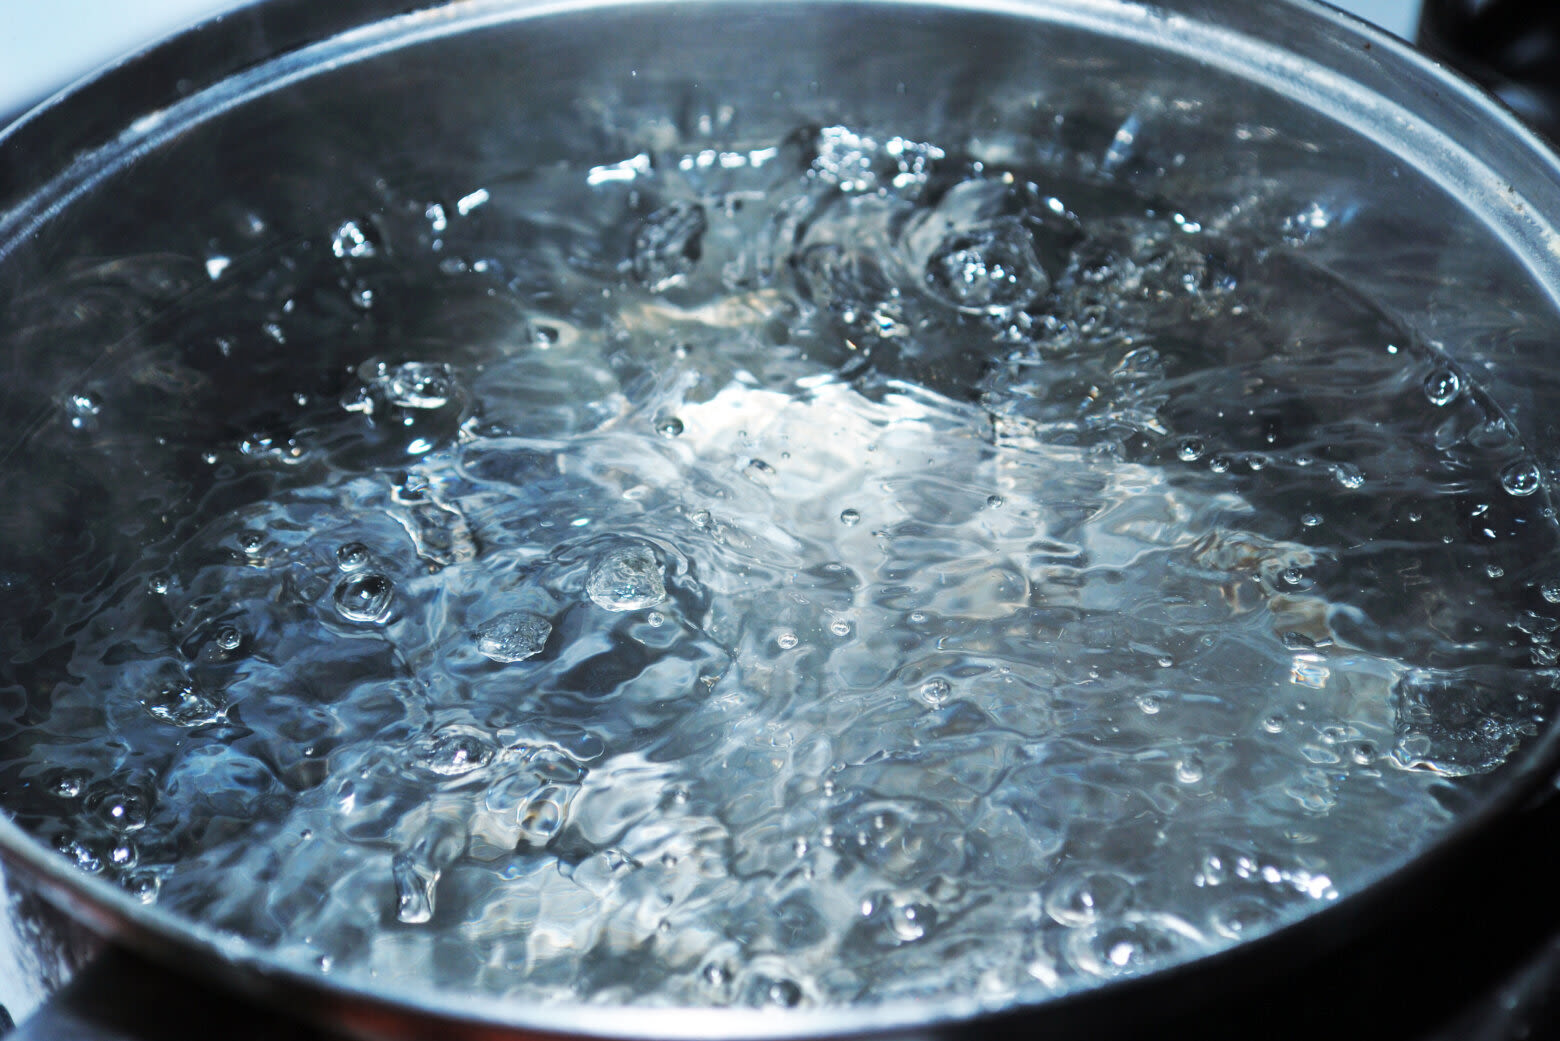 Boil water advisory issued for several Northwest DC neighborhoods - WTOP News